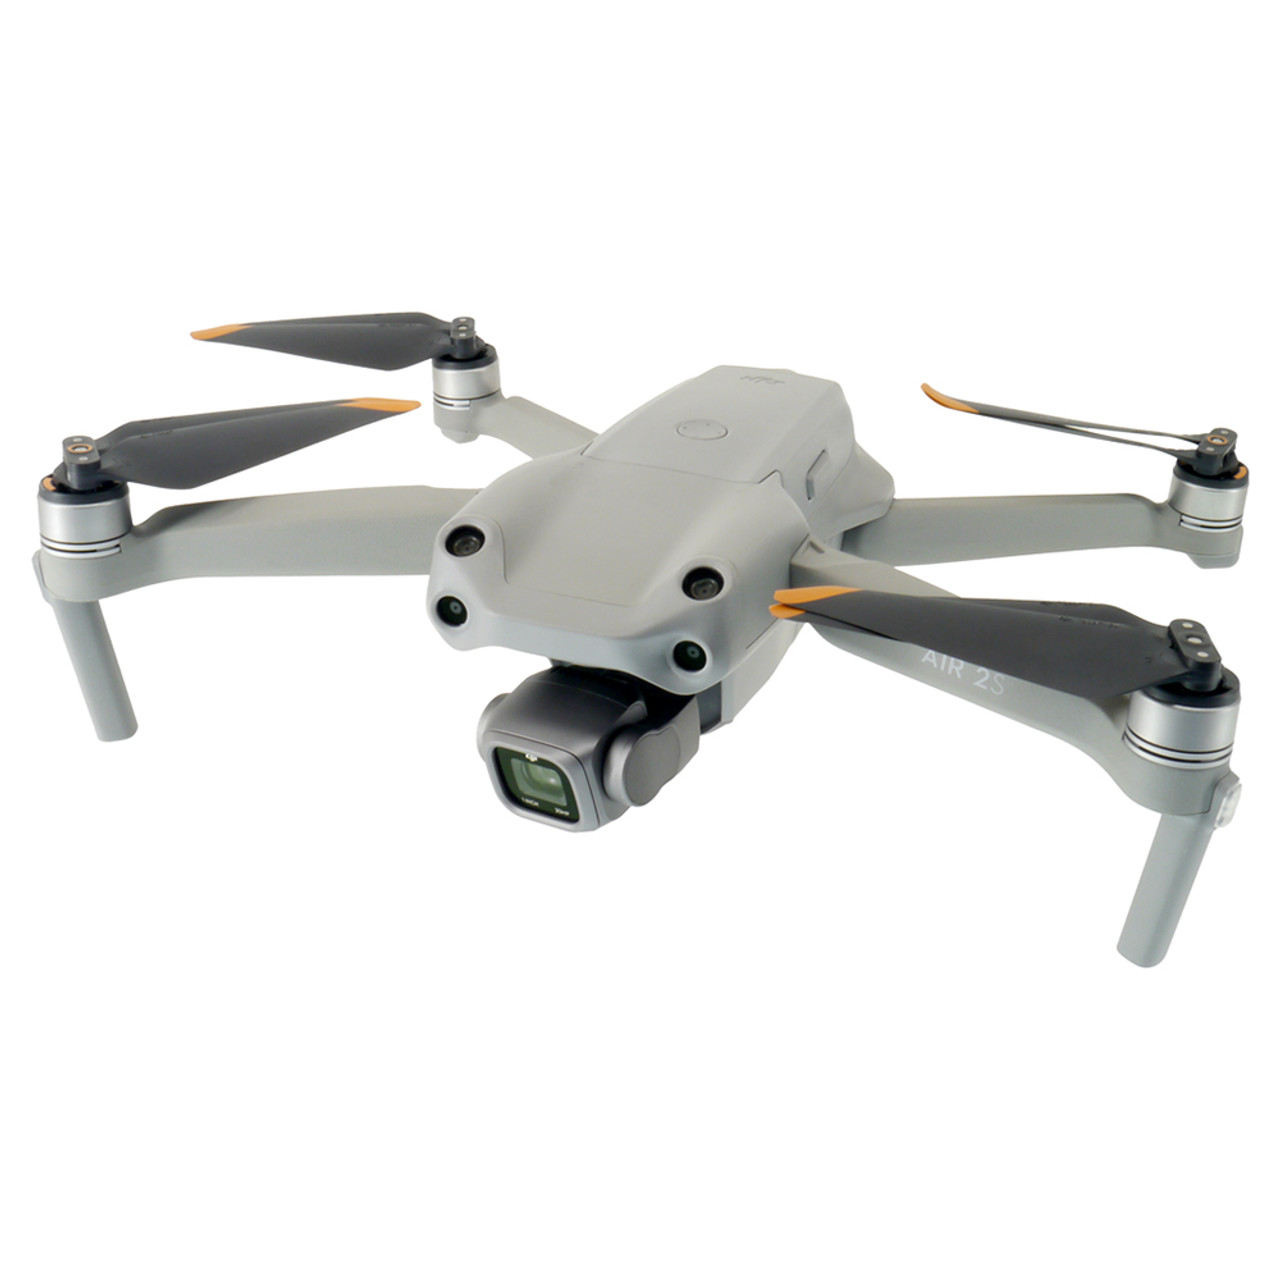 USED DJI AIR 2S DRONE FLY MORE